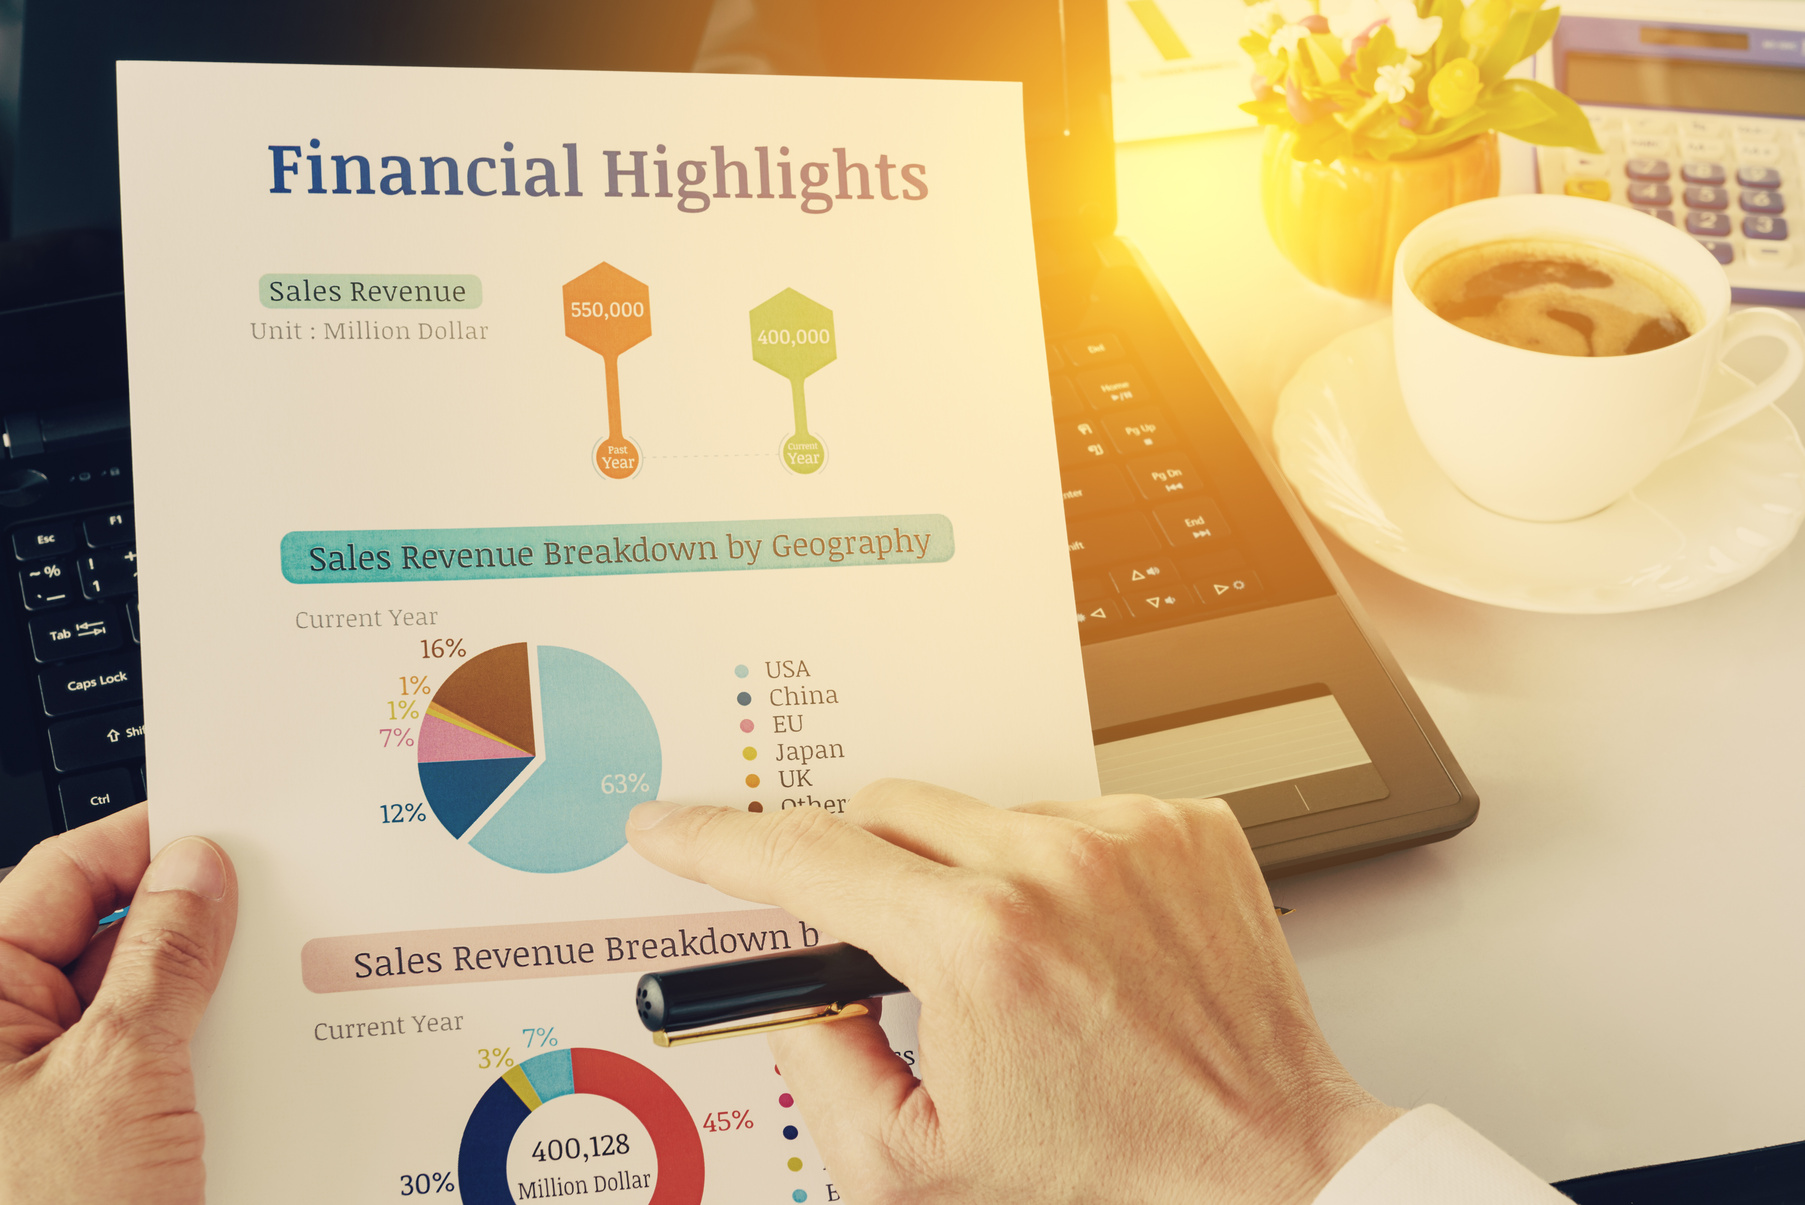 Chief financial officer or CFO holds, sees and analyses financial highlights.